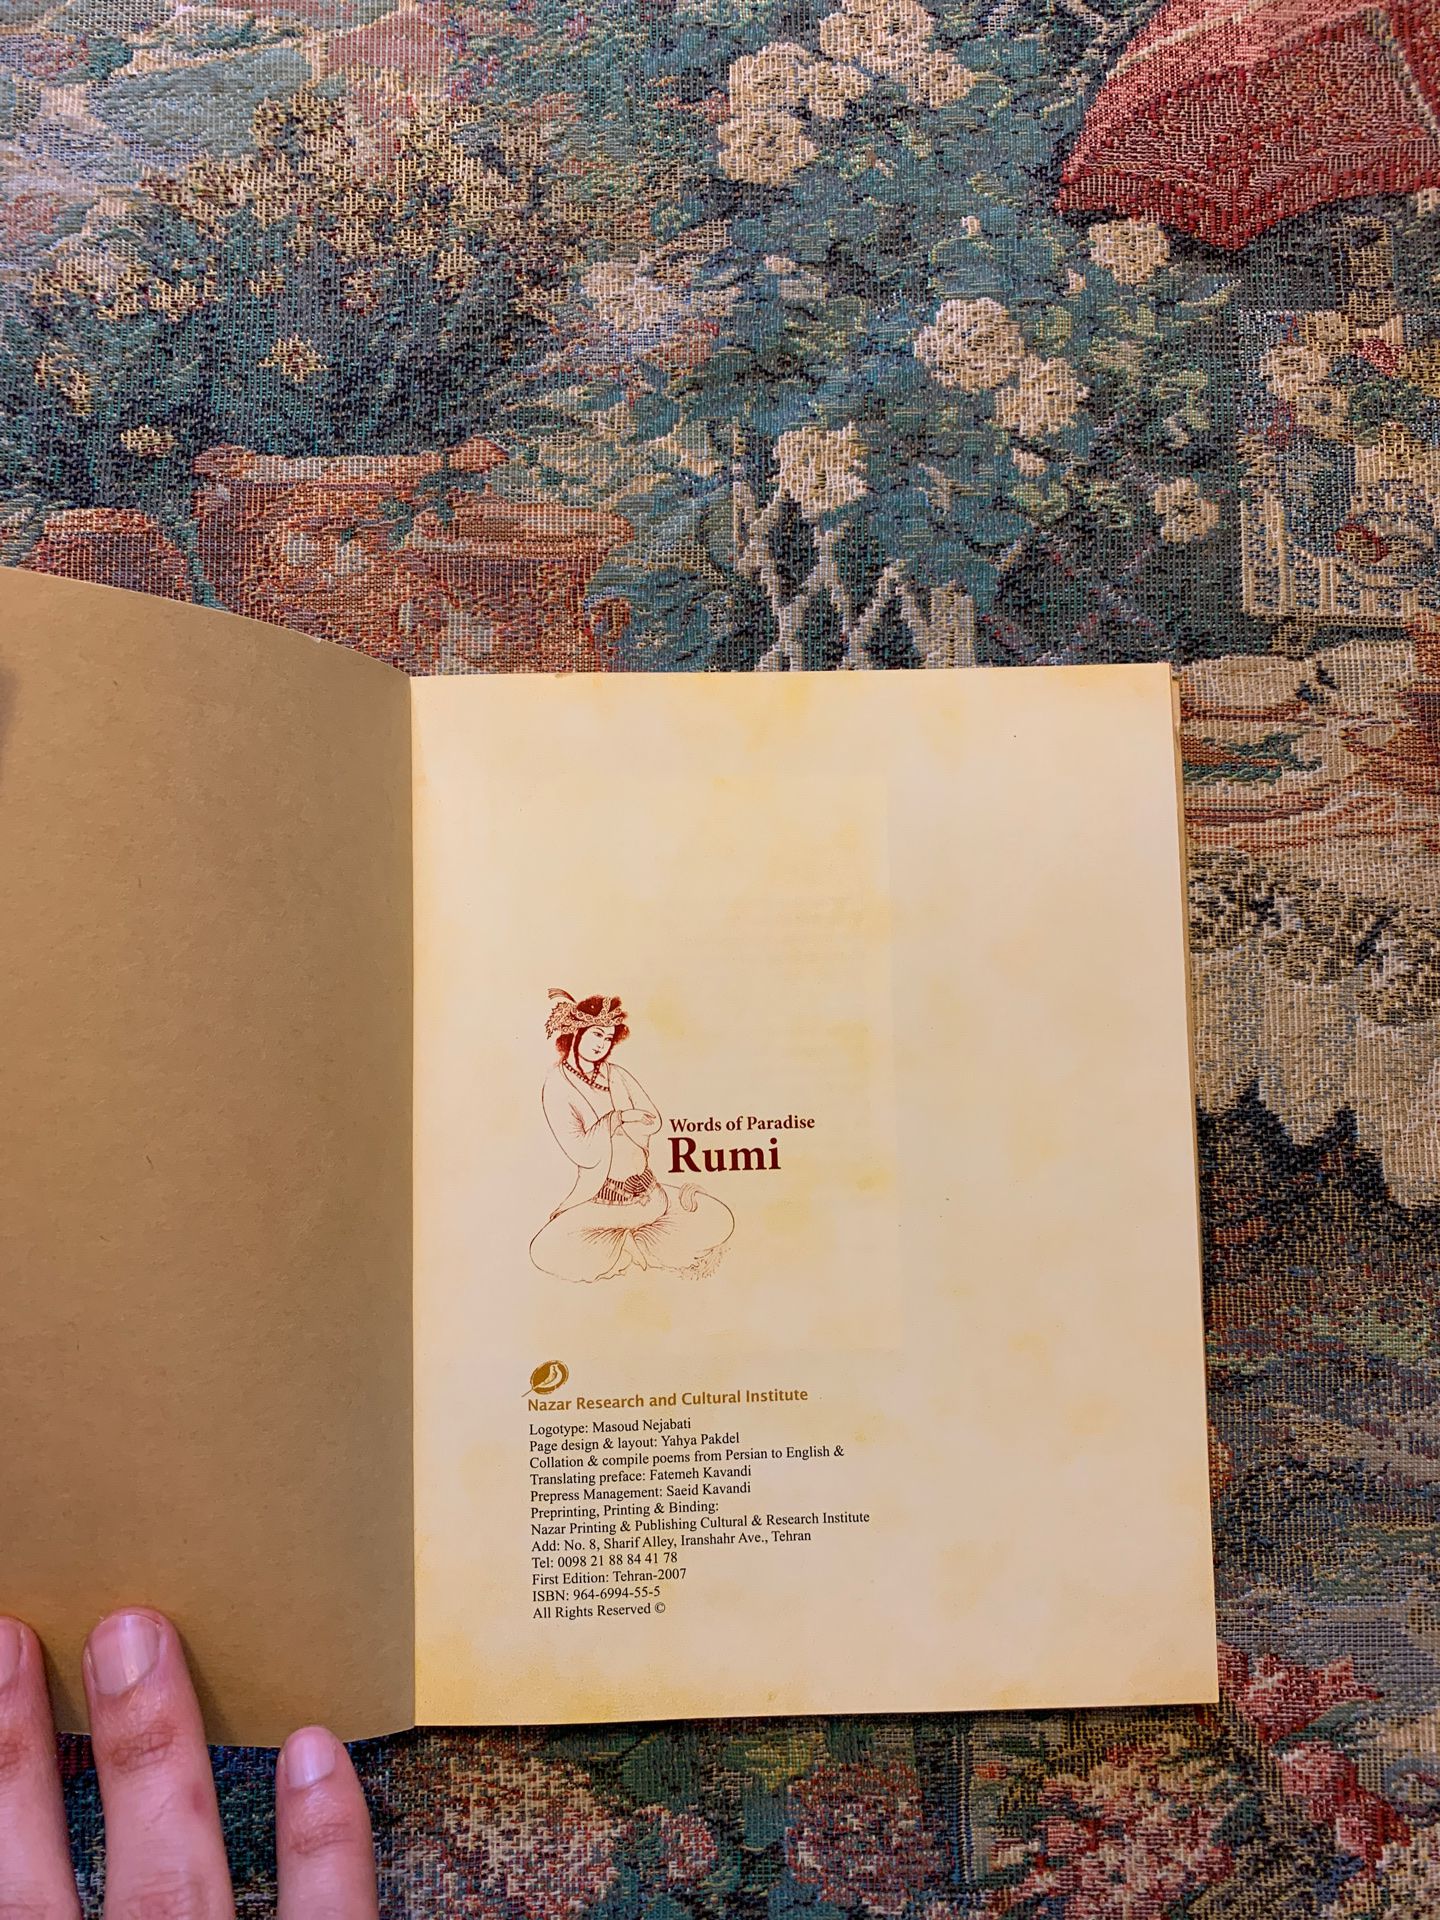 Rumi Words of Paradise full color print book from Iran